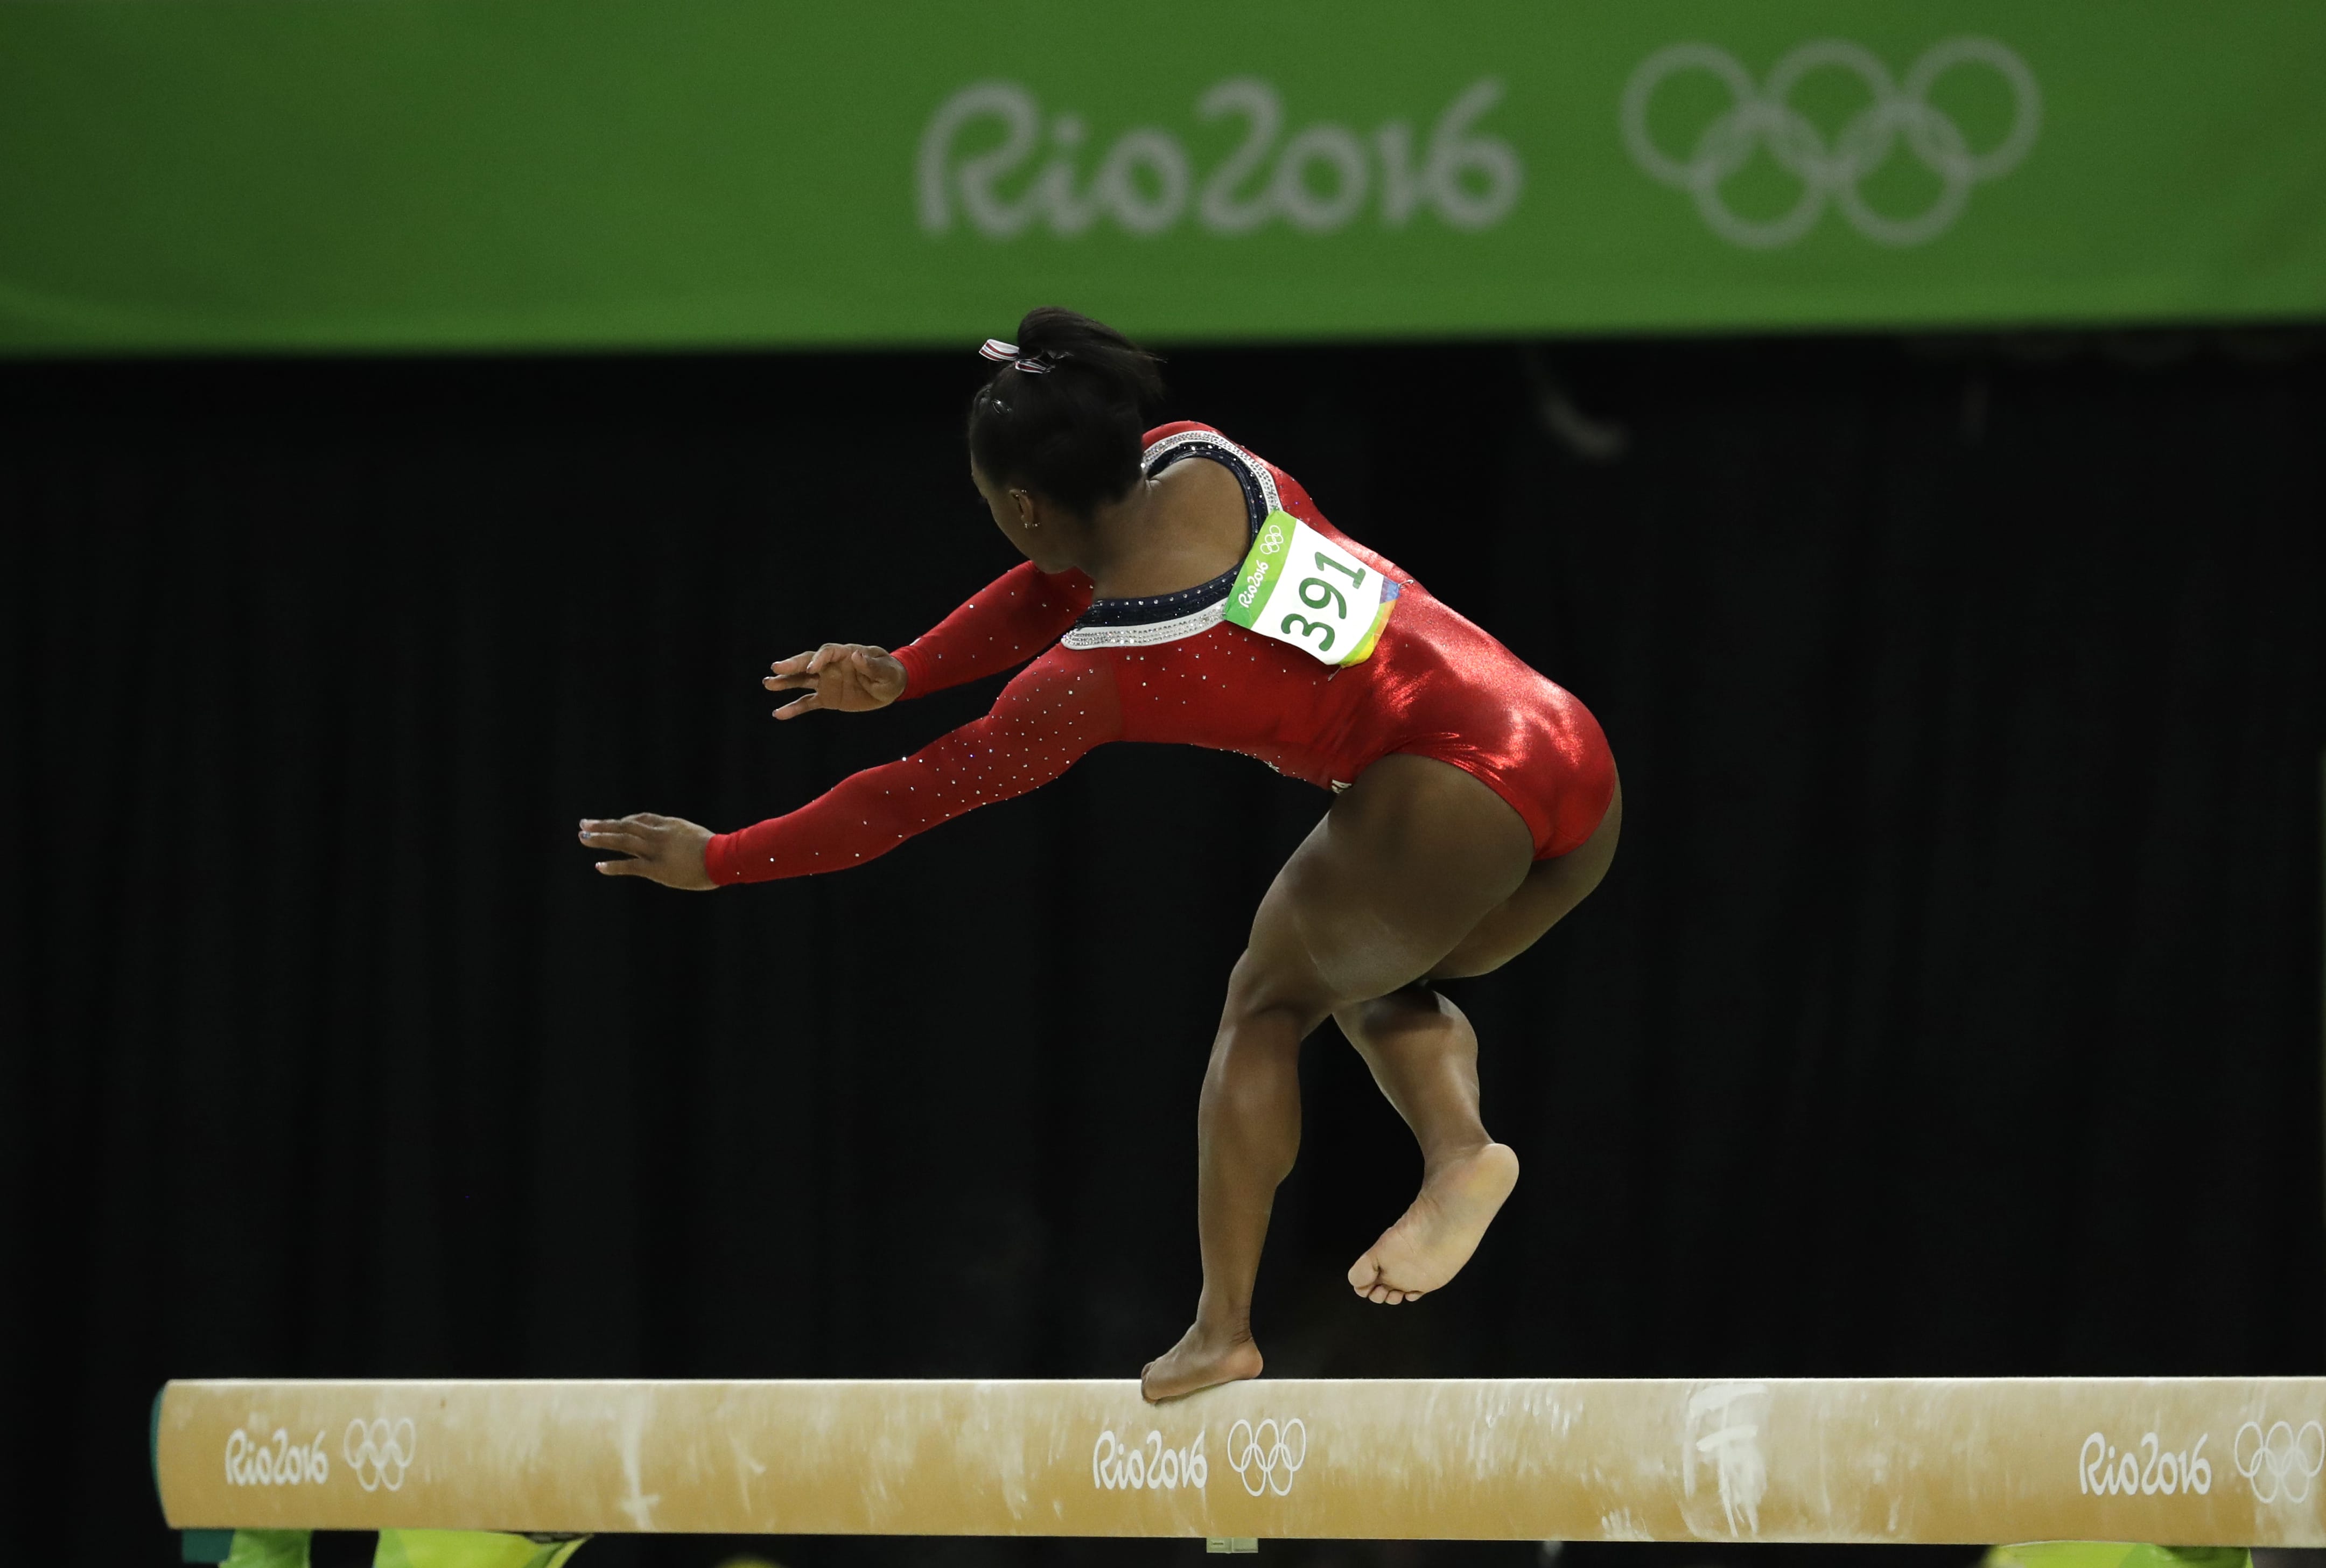 United States' Simone Biles stumbles during her performance on the balance beam during the artistic gymnastics women's apparatus final at the 2016 Summer Olympics in Rio de Janeiro, Brazil, Monday, Aug. 15, 2016.